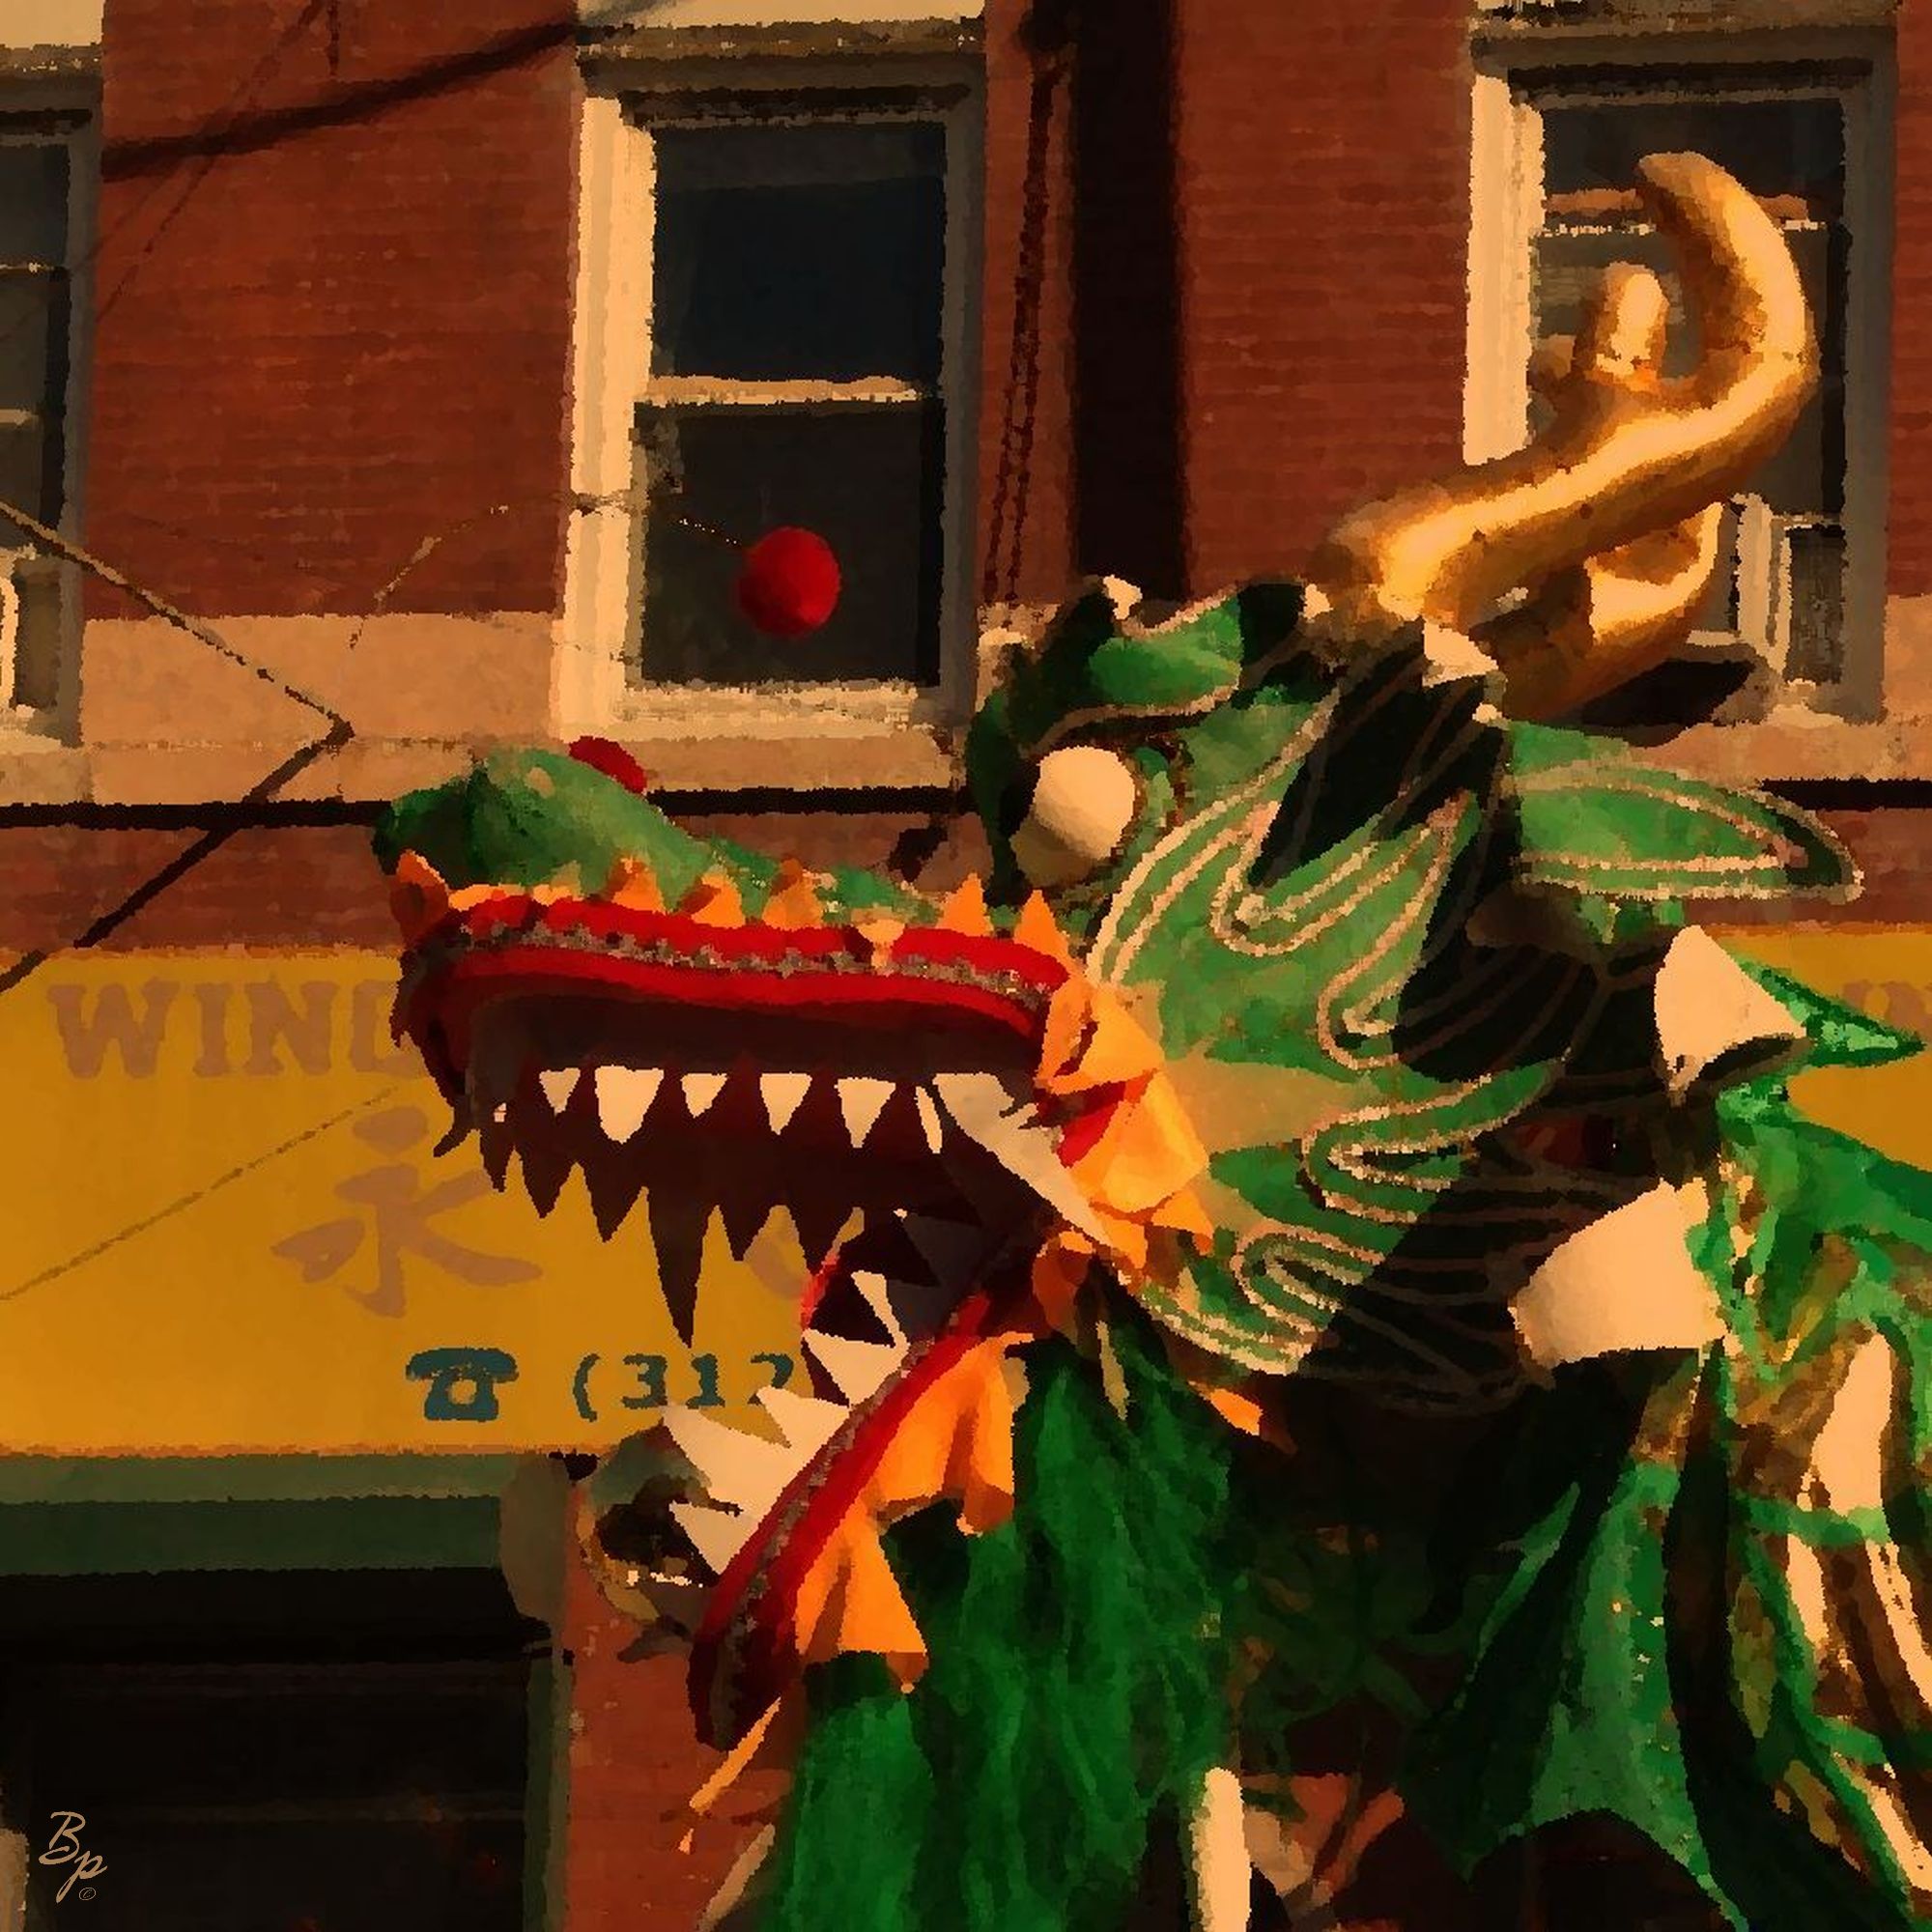 Head of a dragon dancer, winding down the street, same oil can effect, which I am enjoying for this project, pictures from Chicago, Chinese New Year Day Parade, down around Cermack, green dancing dragon head